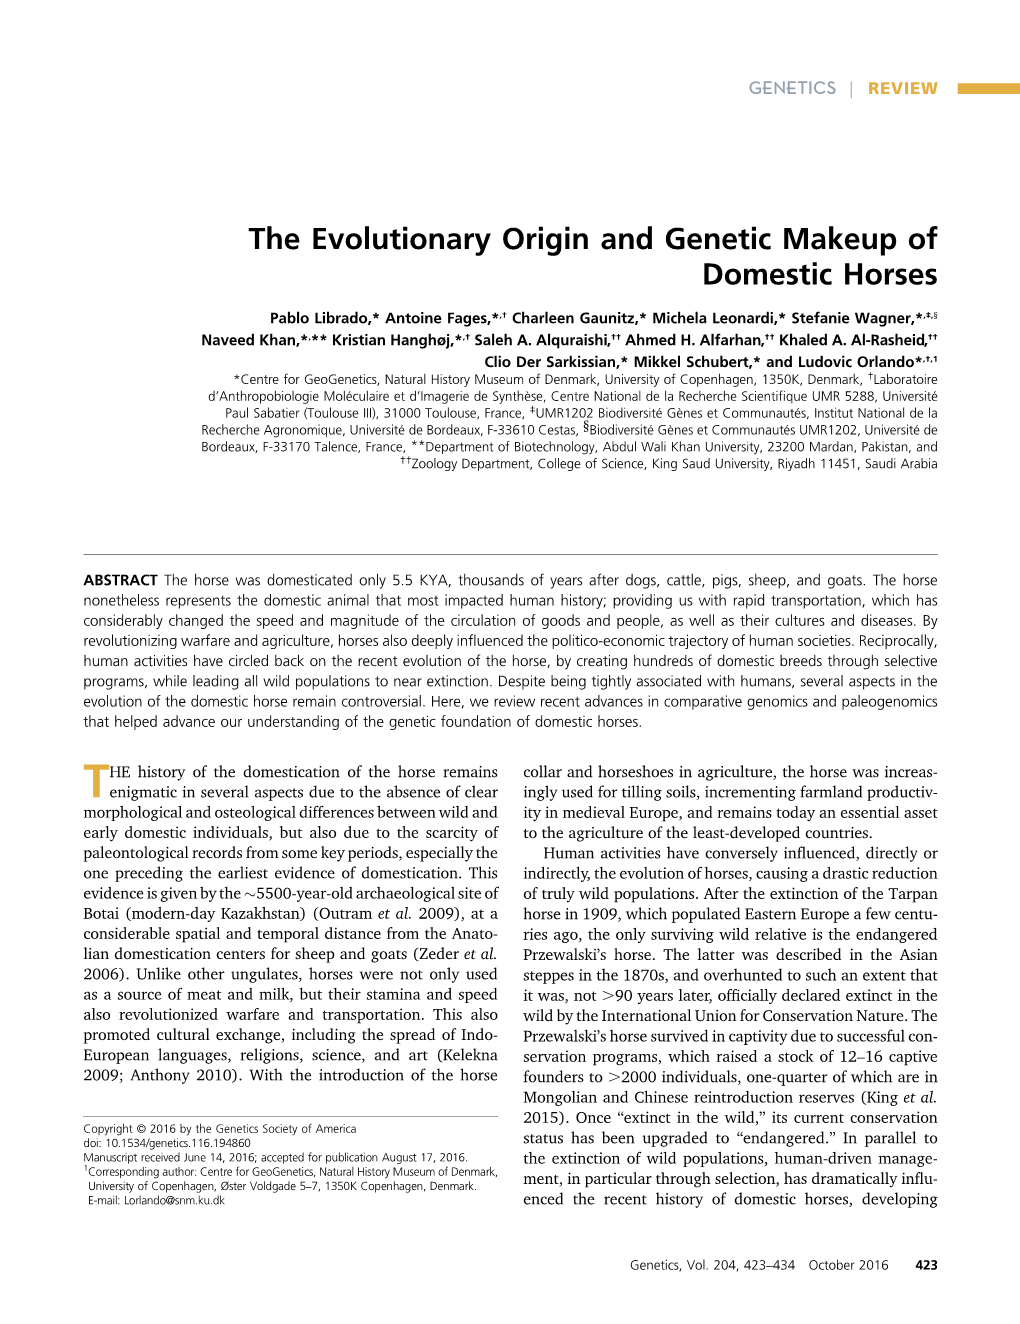 The Evolutionary Origin and Genetic Makeup of Domestic Horses